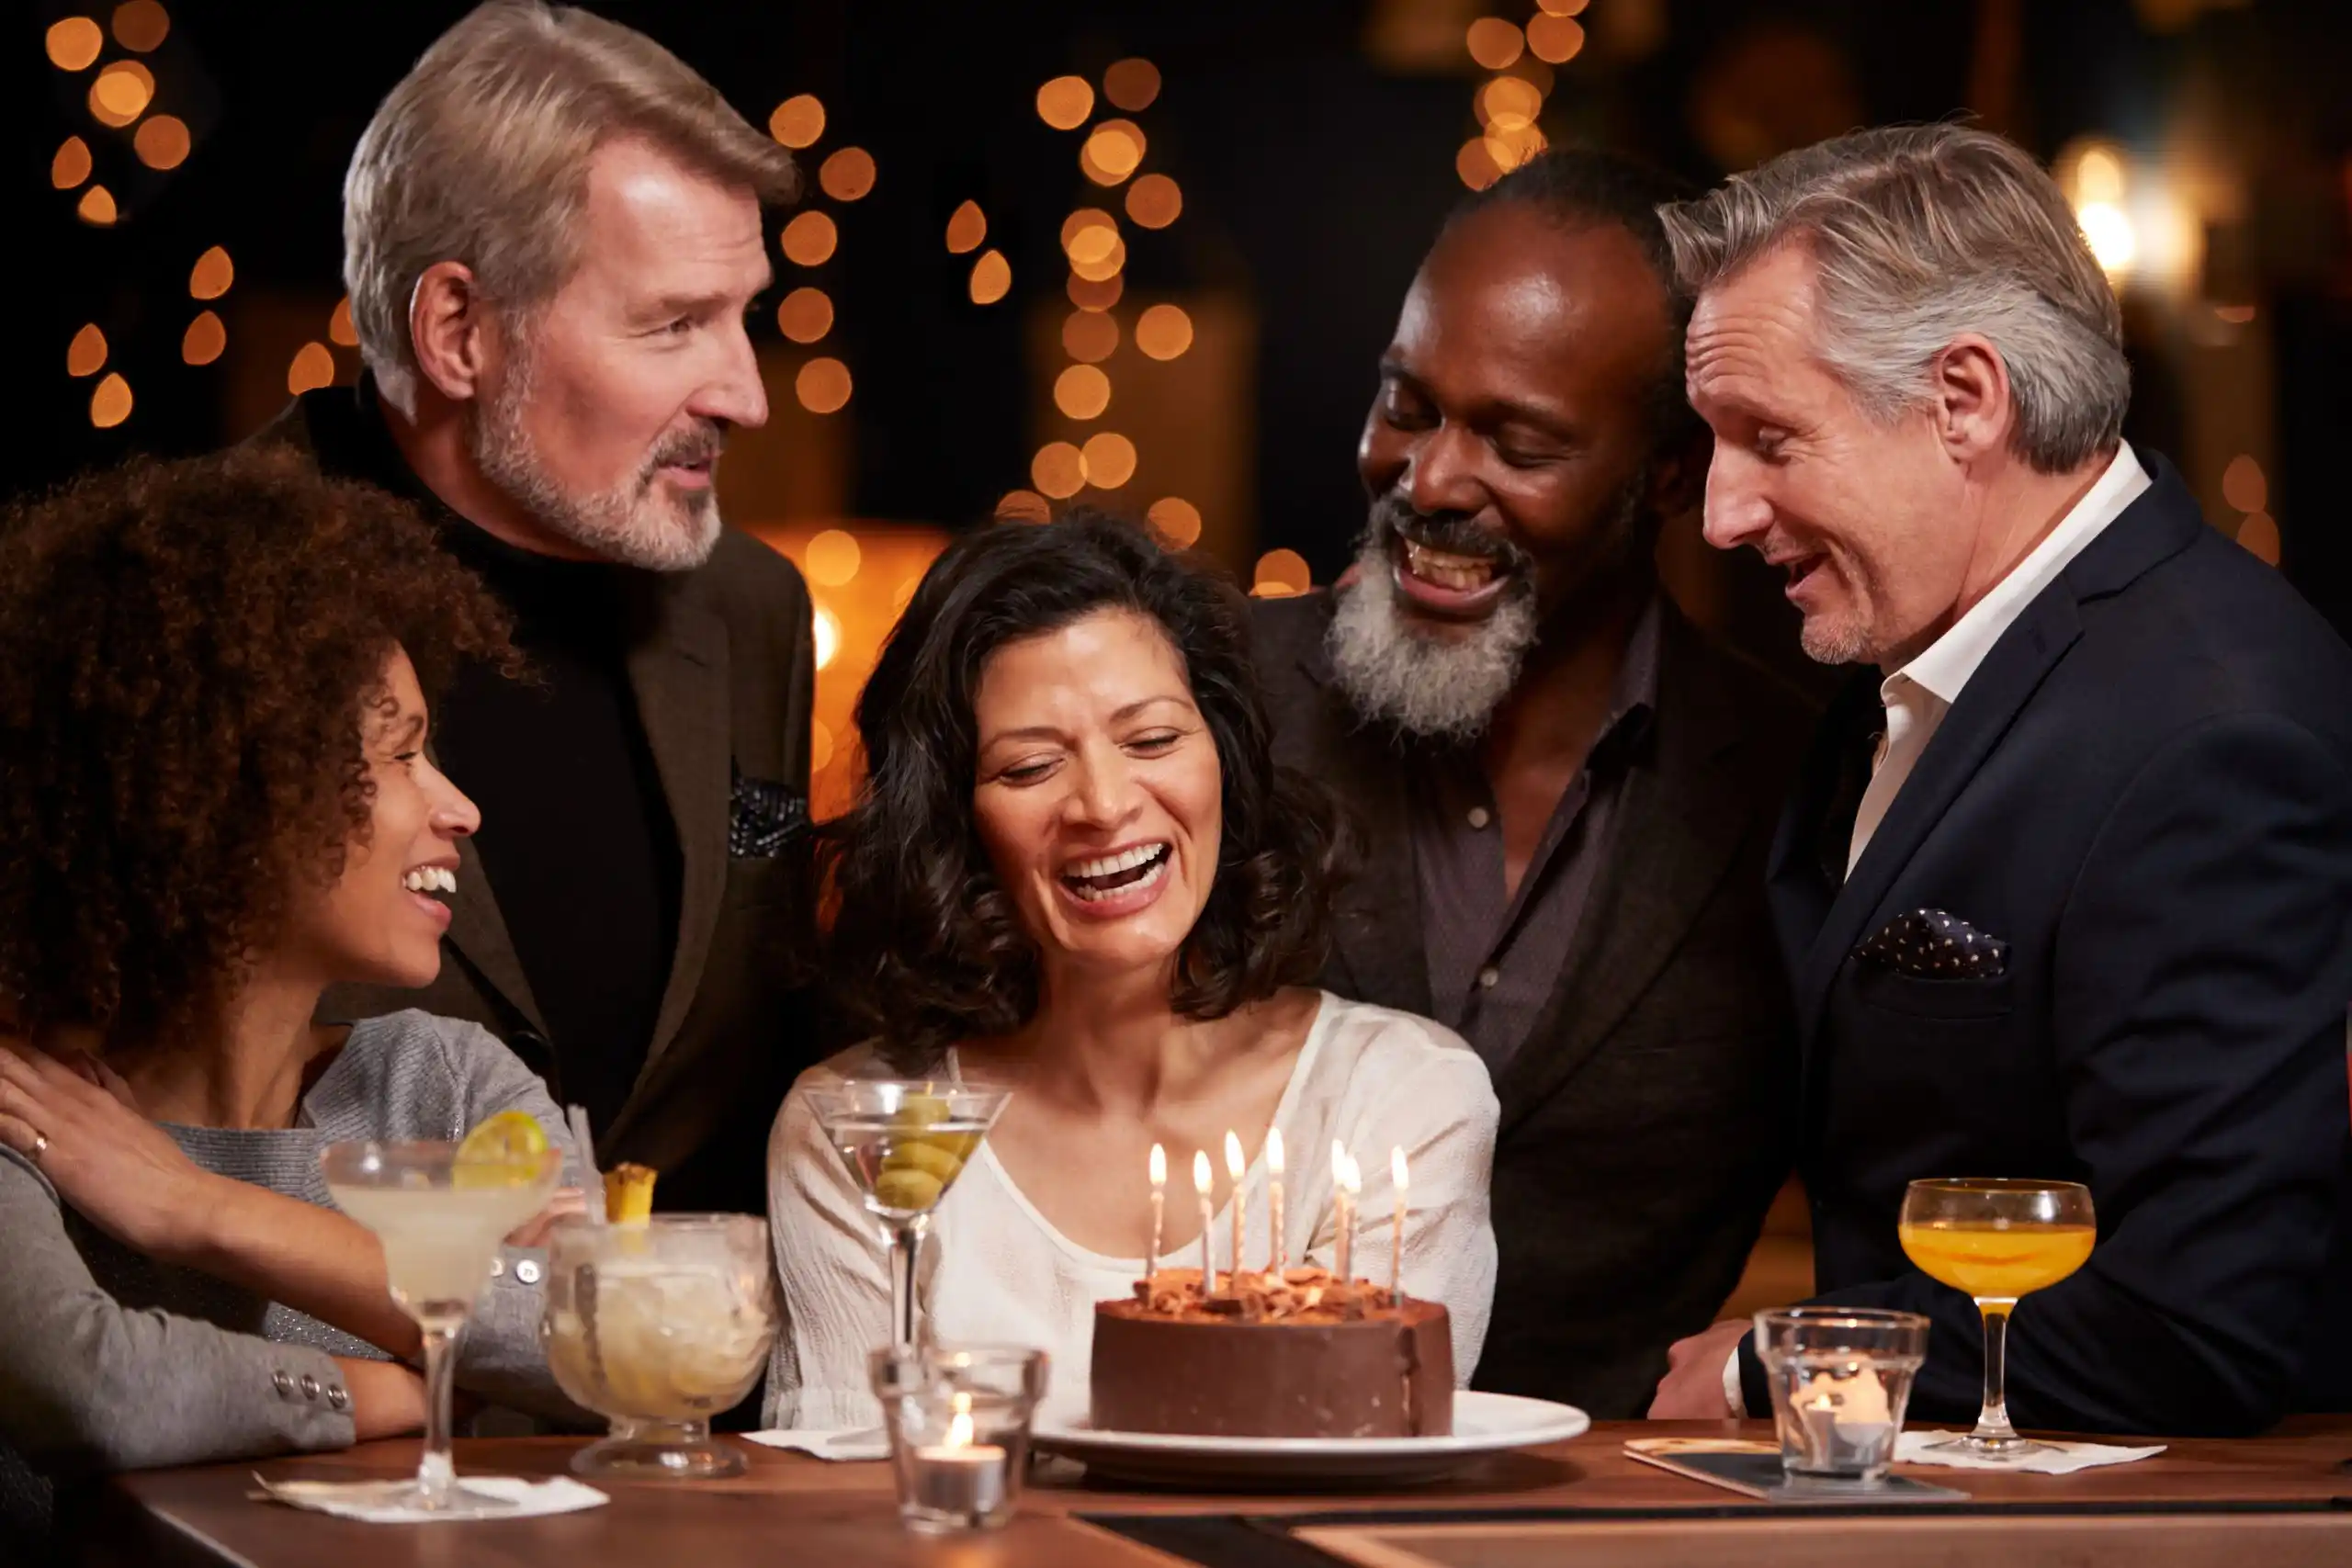 Woman Celebrating 40th Birthday with Friends